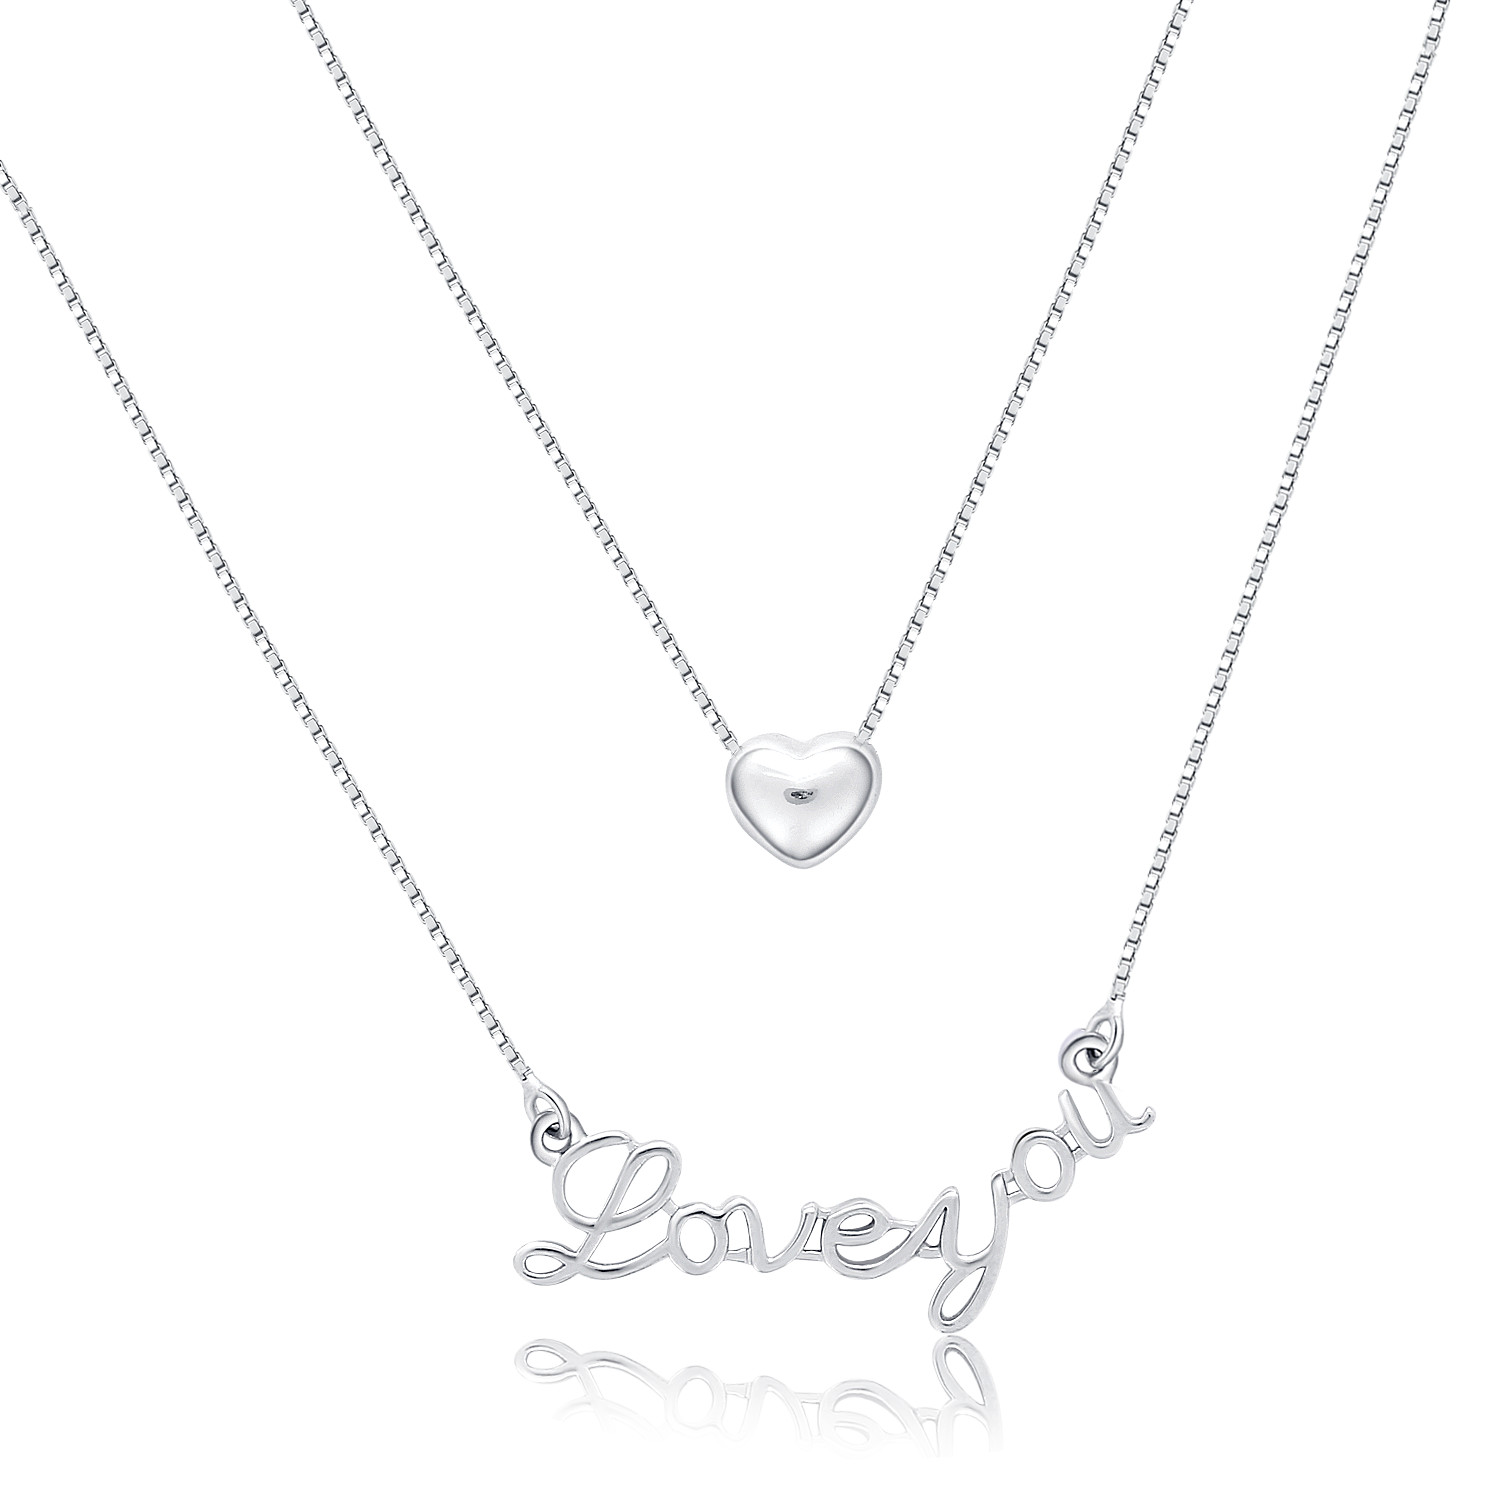 925 sterling silver personalzie pendant necklace chain couple jewelry OEM/ODM welcome necklace chain(图2)